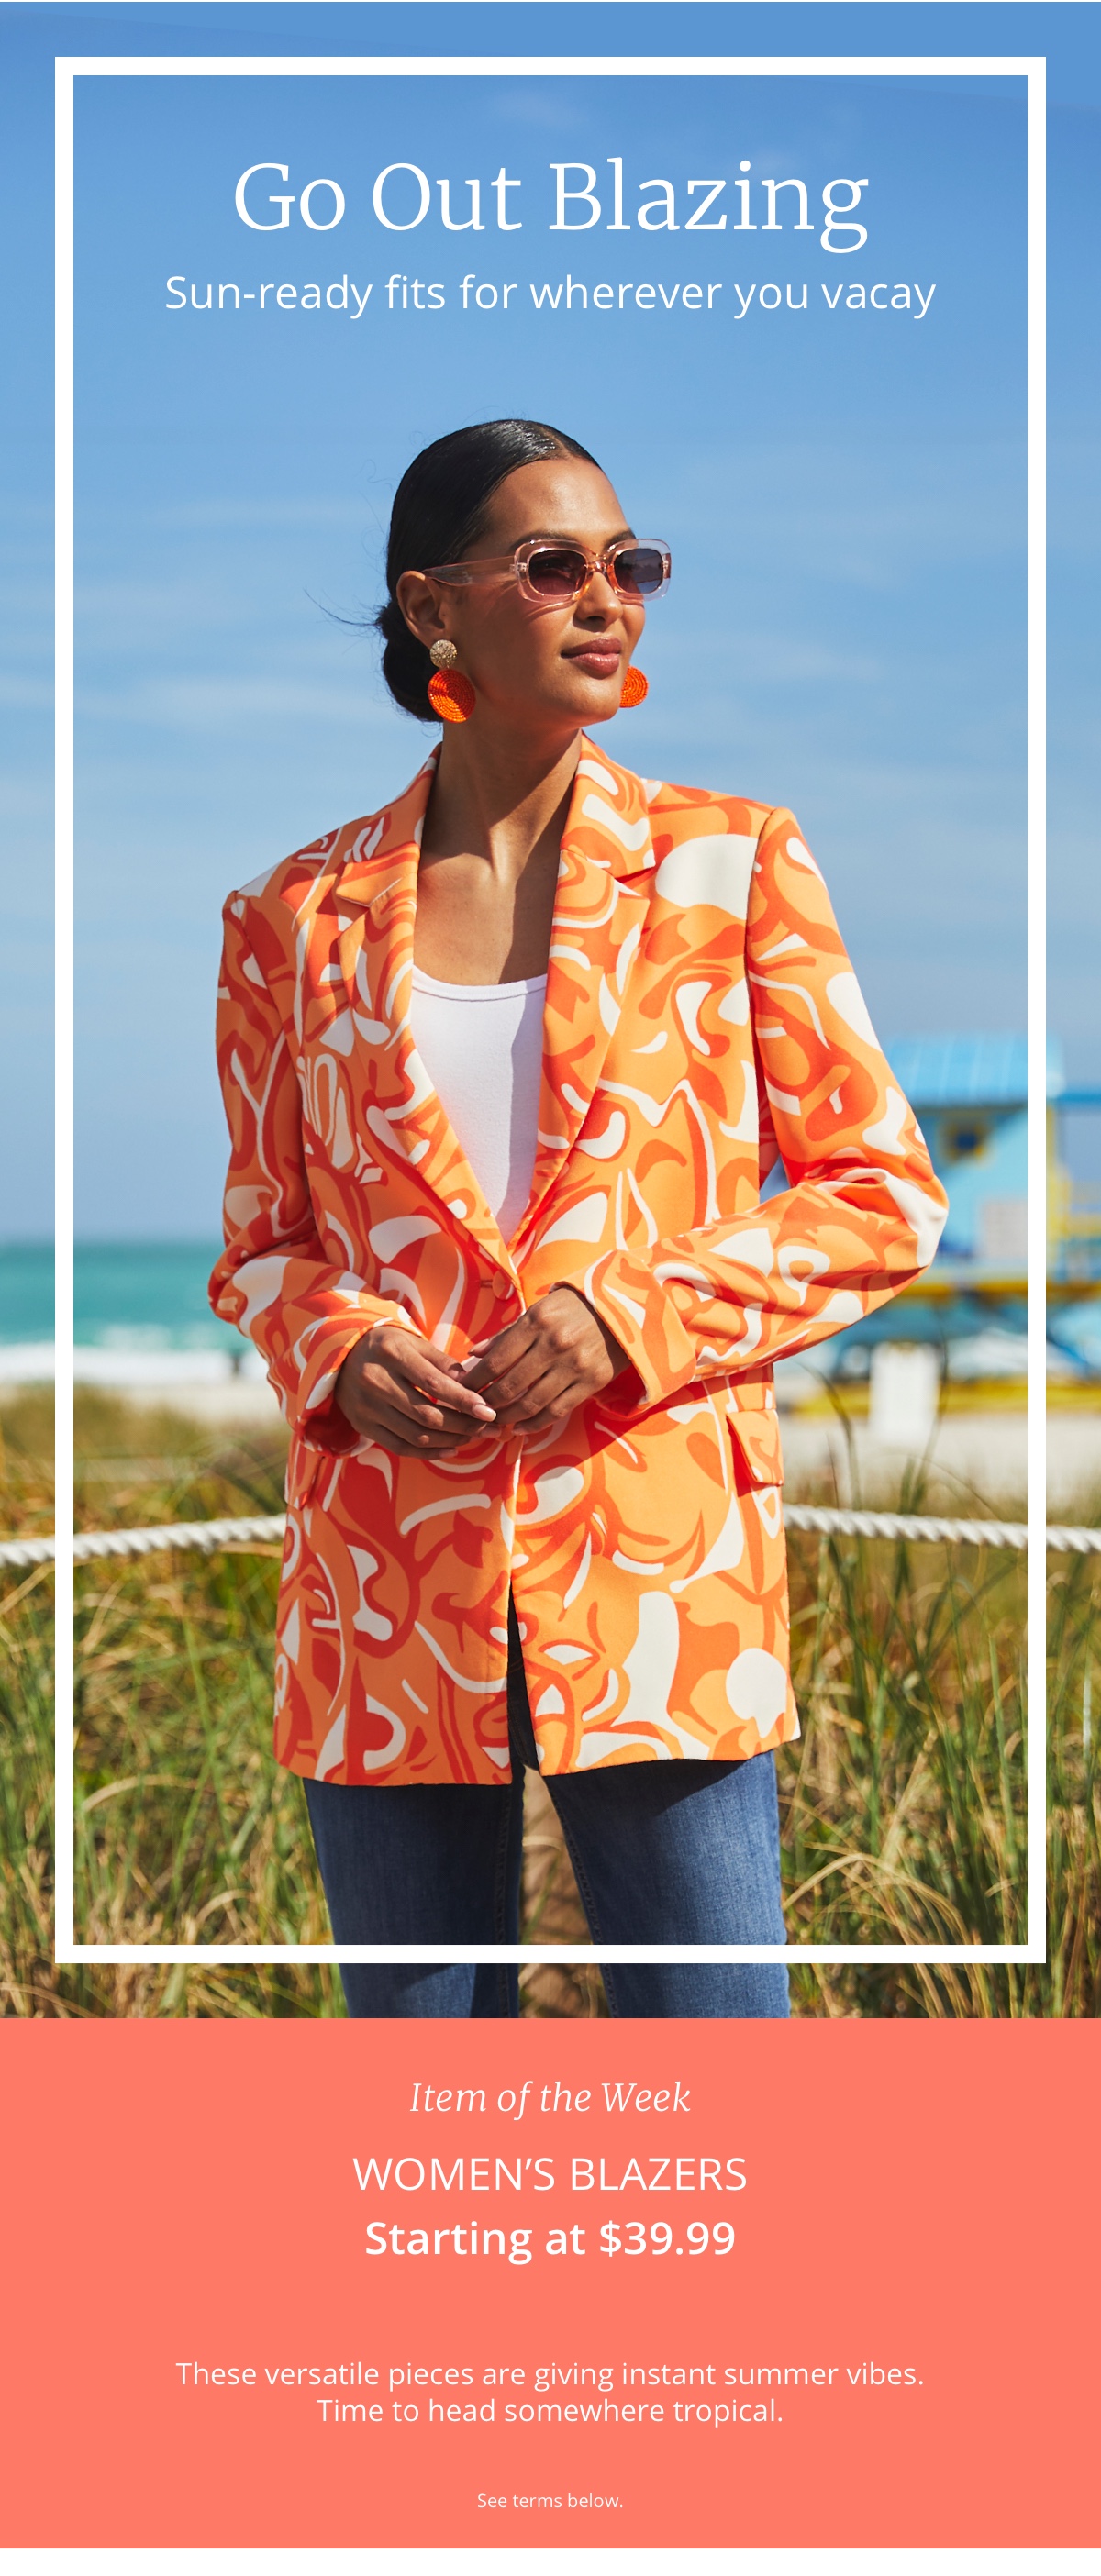 Go Out Blazing|Sun-ready fits for wherever you vacay|Item of the Week|Womens Blazers|Starting at $39.99|These versatile pieces are giving instant summer vibes.| Time to head somewhere tropical.|See terms below.